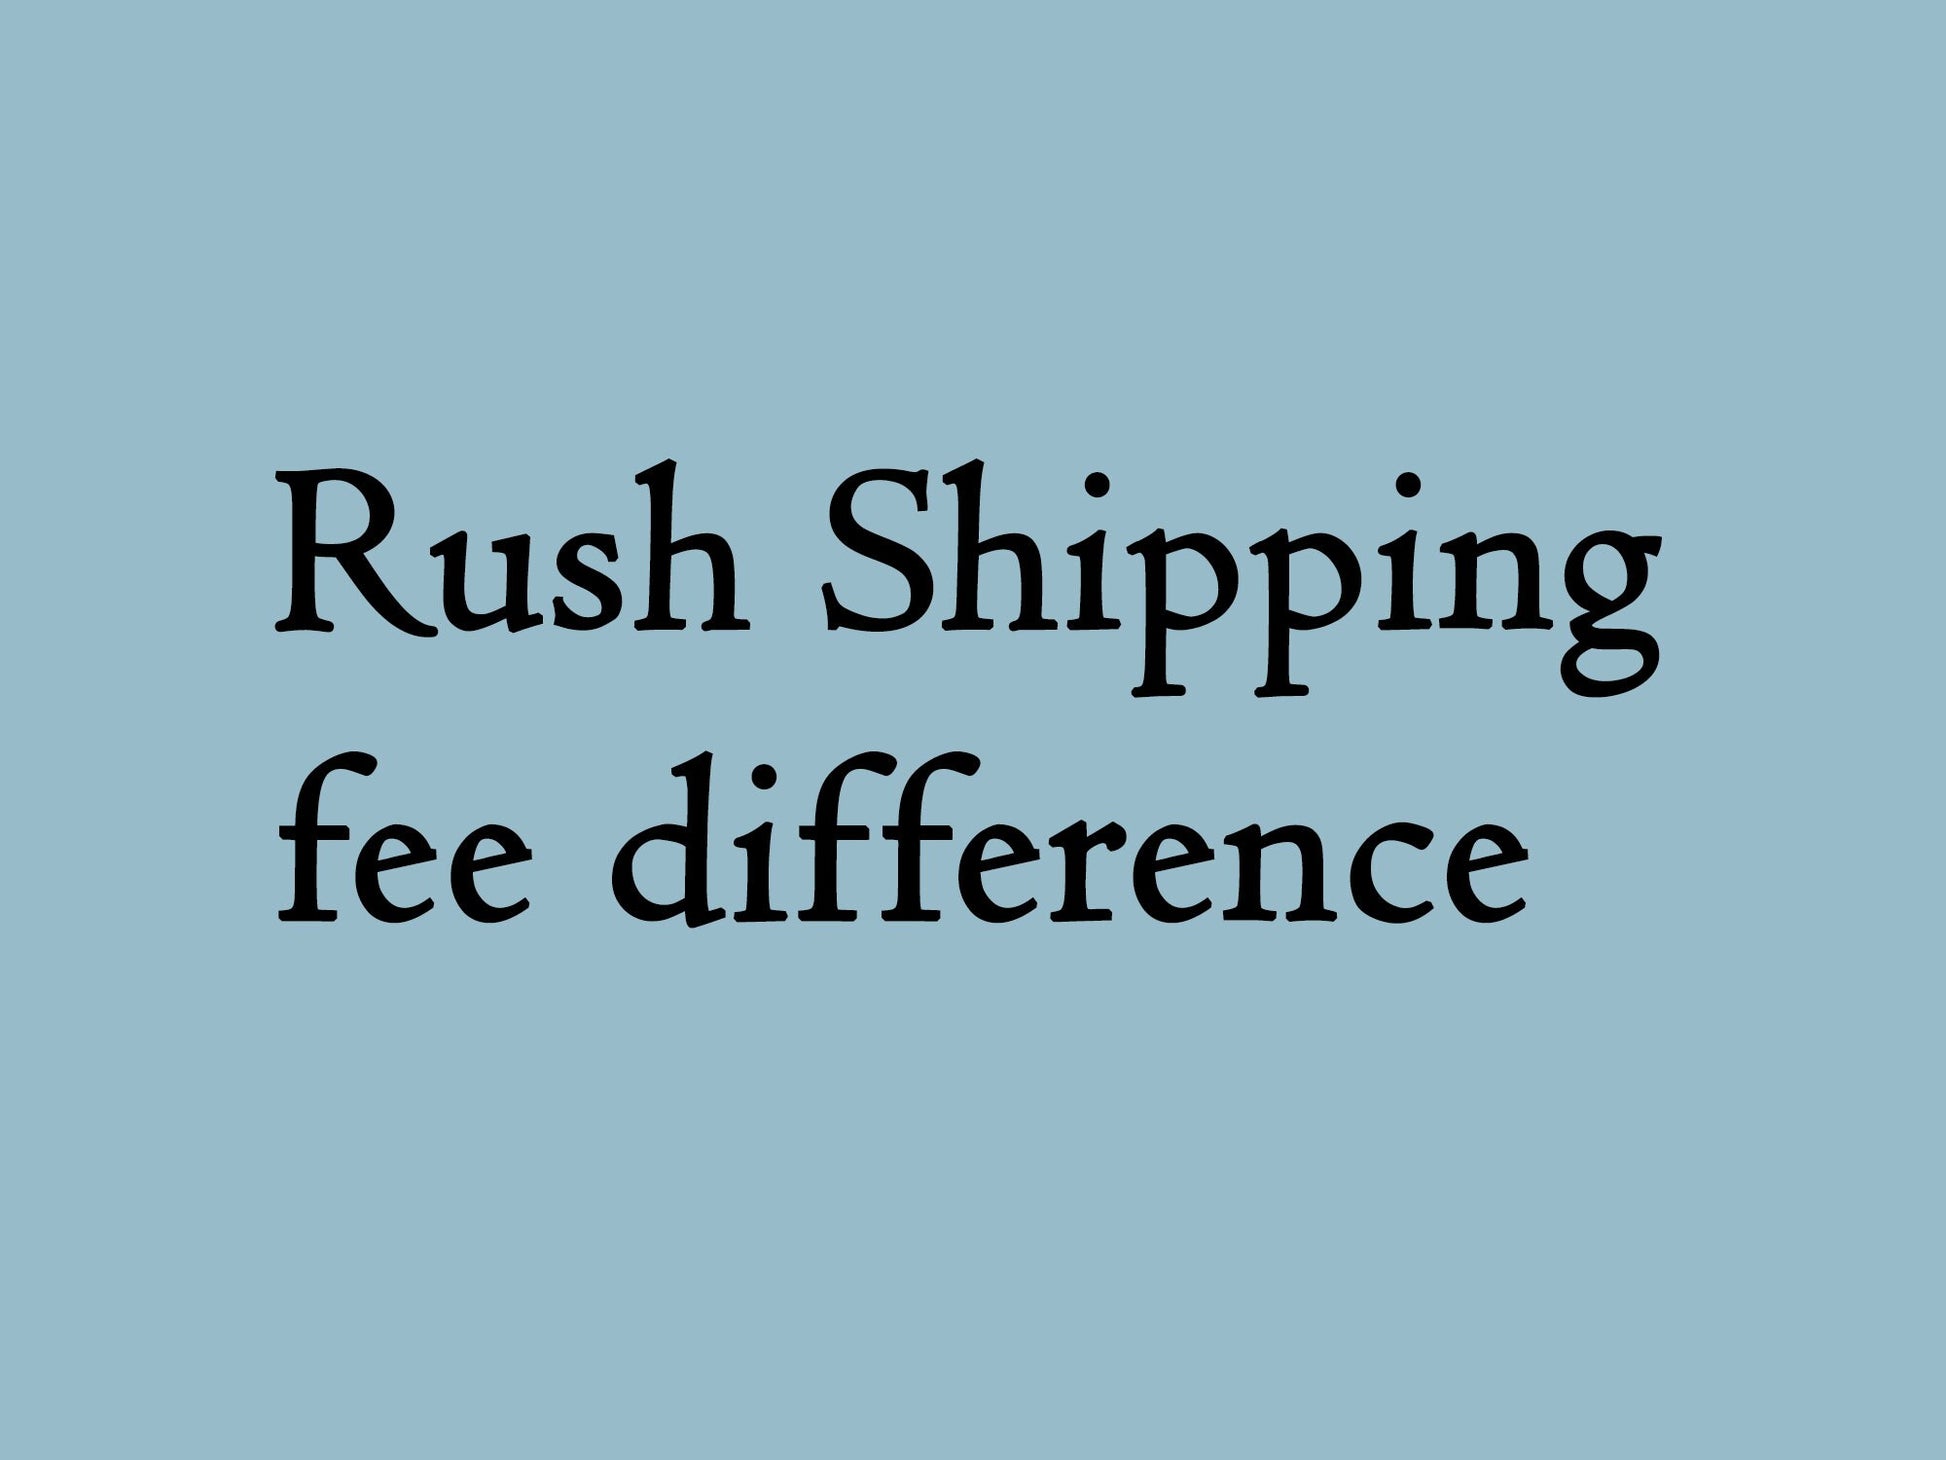 Rush shipping fee difference